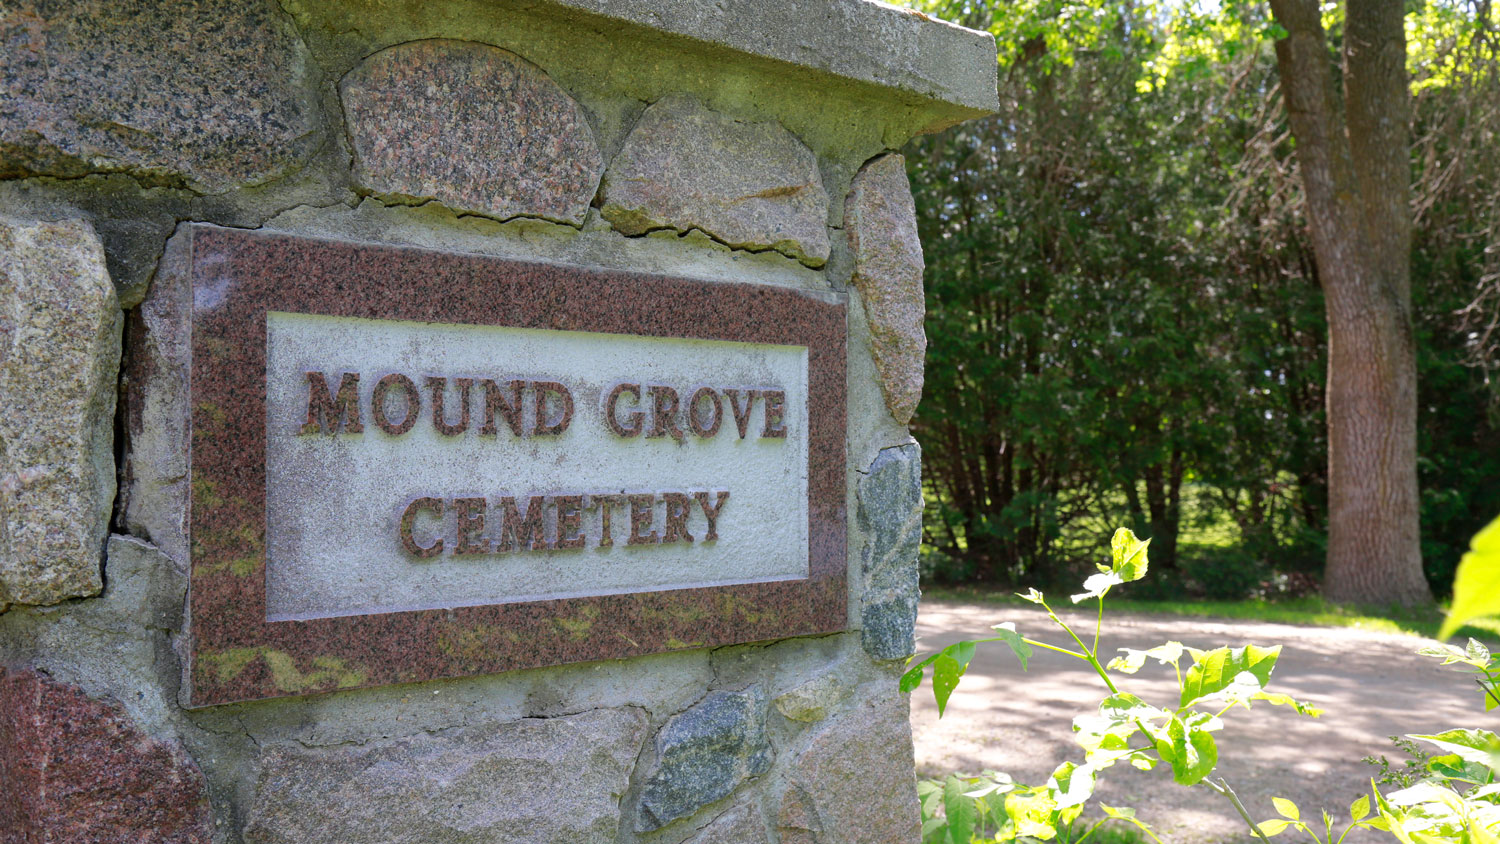 Entrance to Mound Grove Cemetery in Evansville, Minnesota